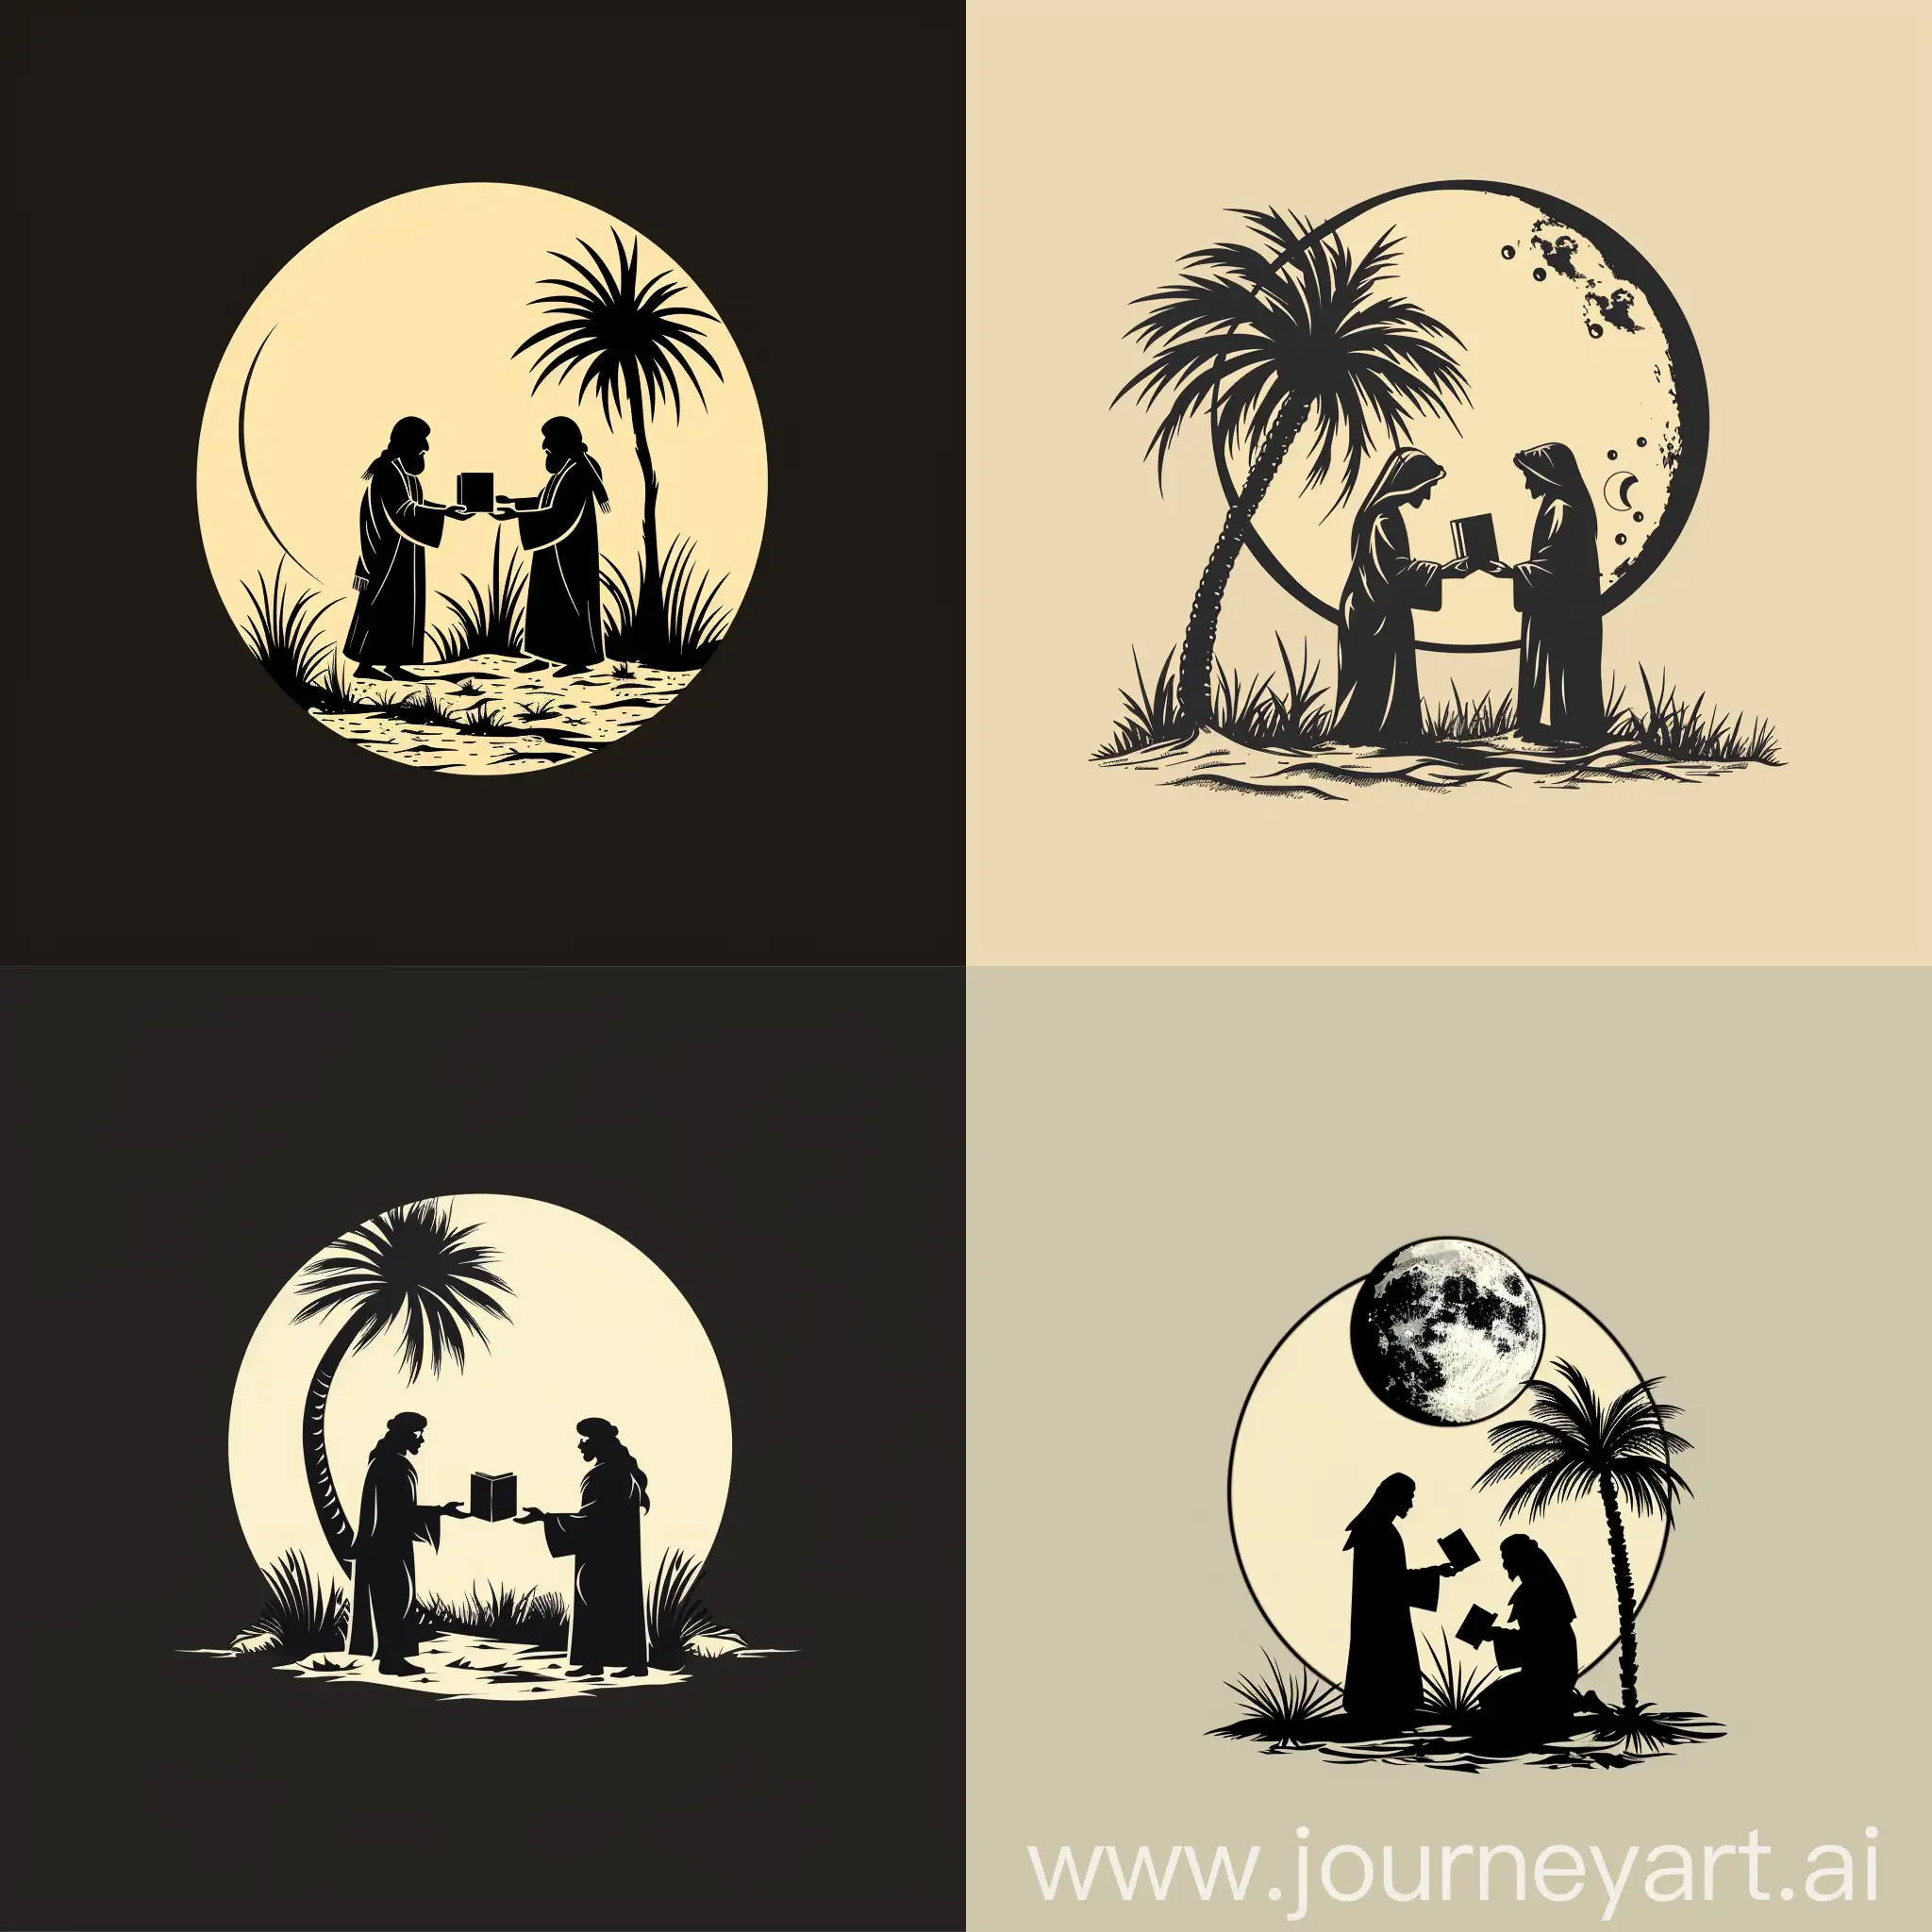 a very simple logo of two Bedouin
men exchanging books under a palm tree in a oasis that has some grass with the big full moon behind, make the two men and palm tree black and the color the oasis ground and moon